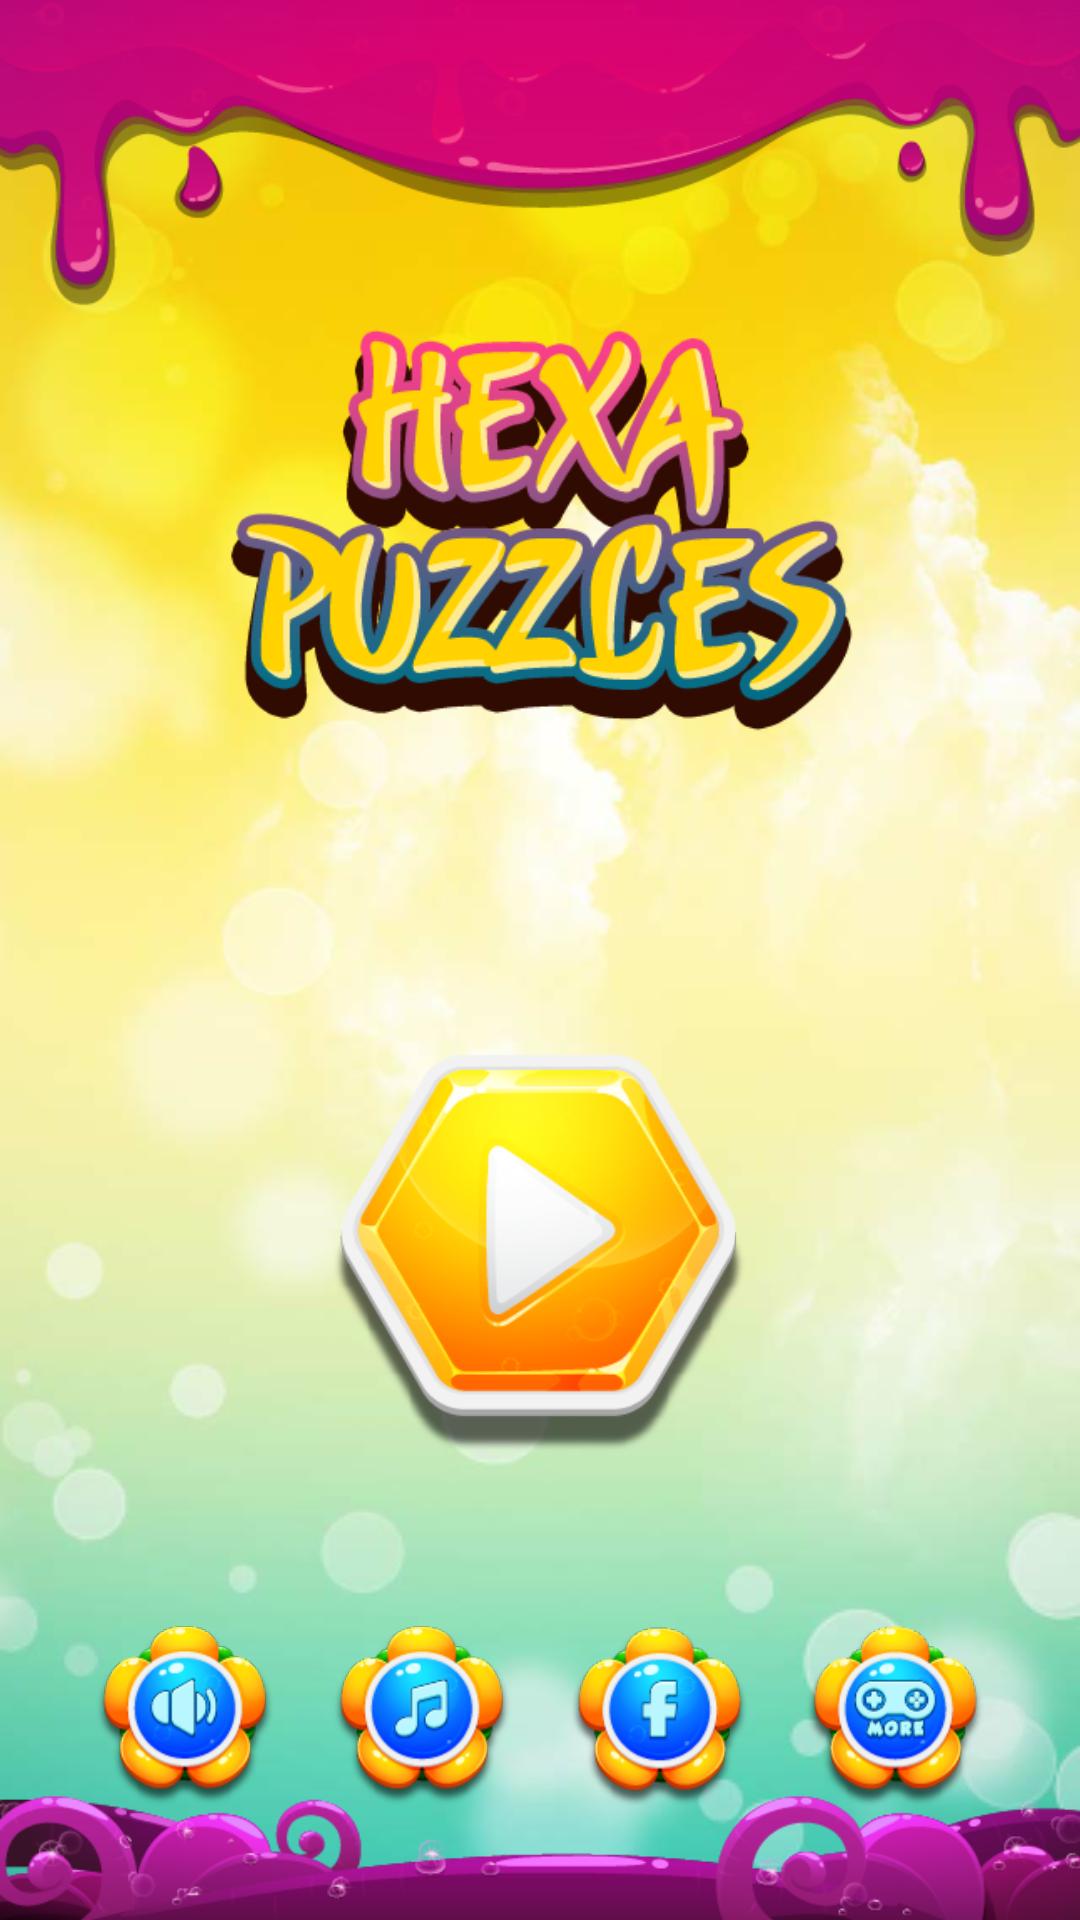 Making Puzzle Hexa Blocks - Brain Game for Android - APK Download